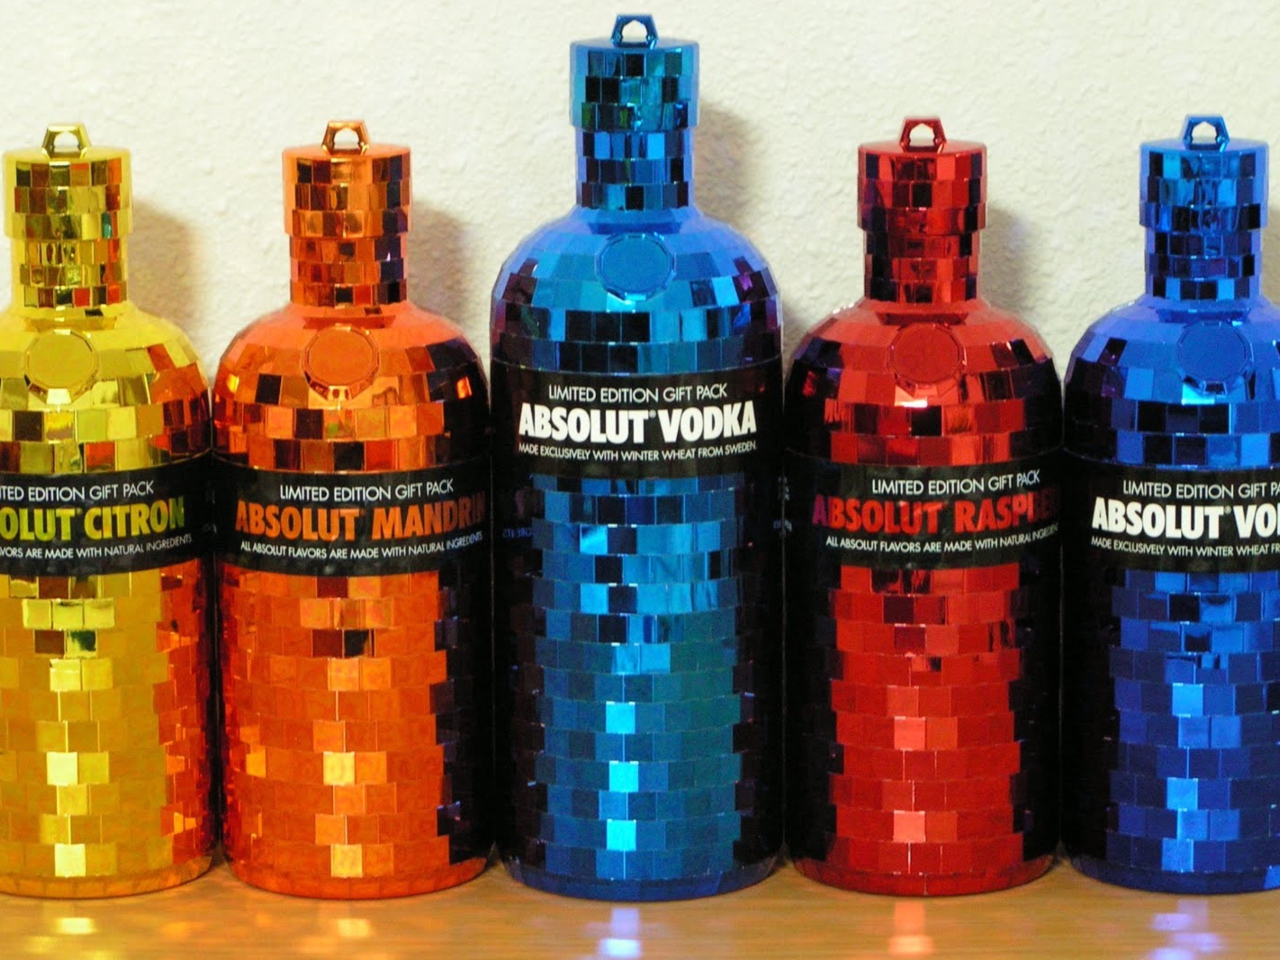 Absolut Vodka Limited Edition wallpaper 1280x960